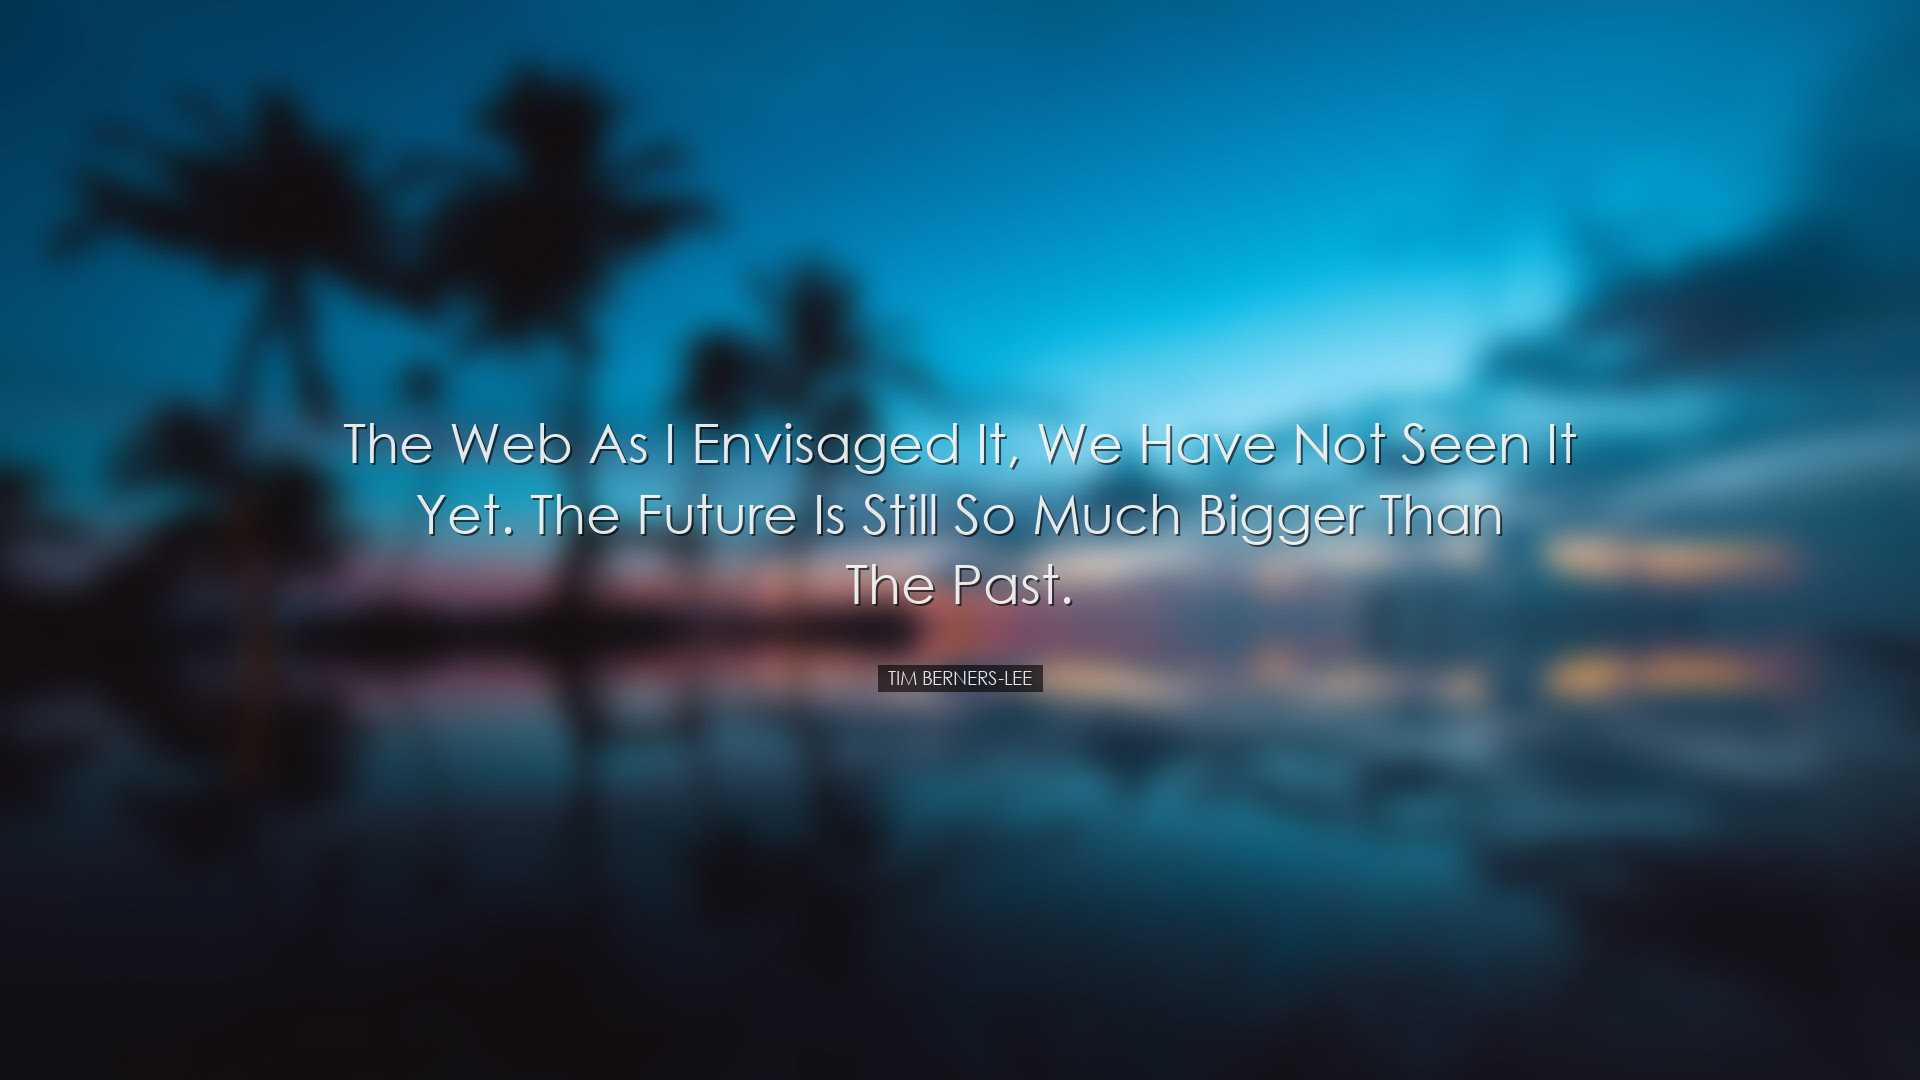 The Web as I envisaged it, we have not seen it yet. The future is